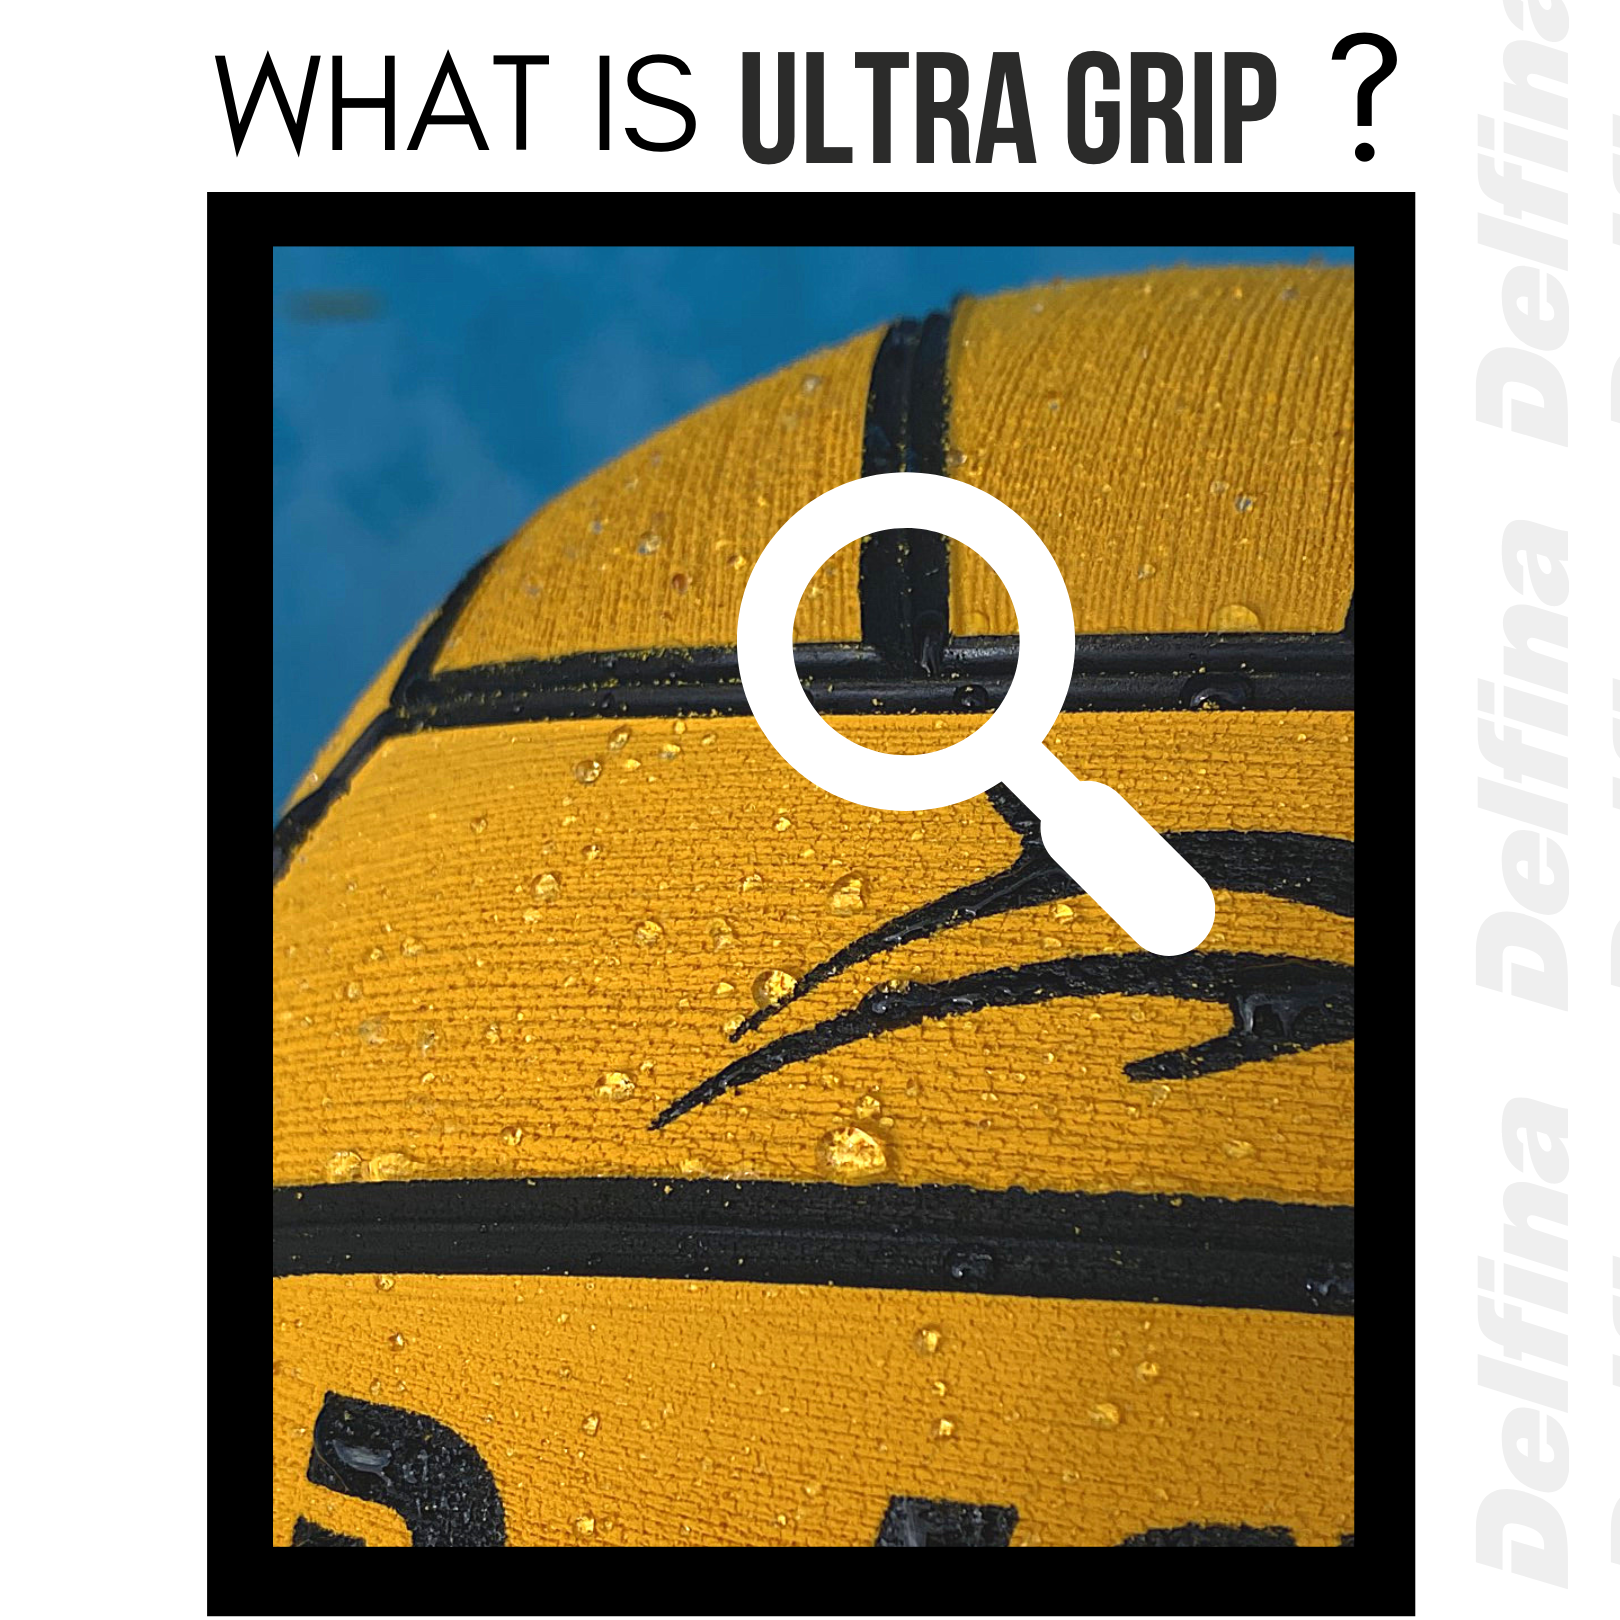 What is ULTRA GRIP Technology?